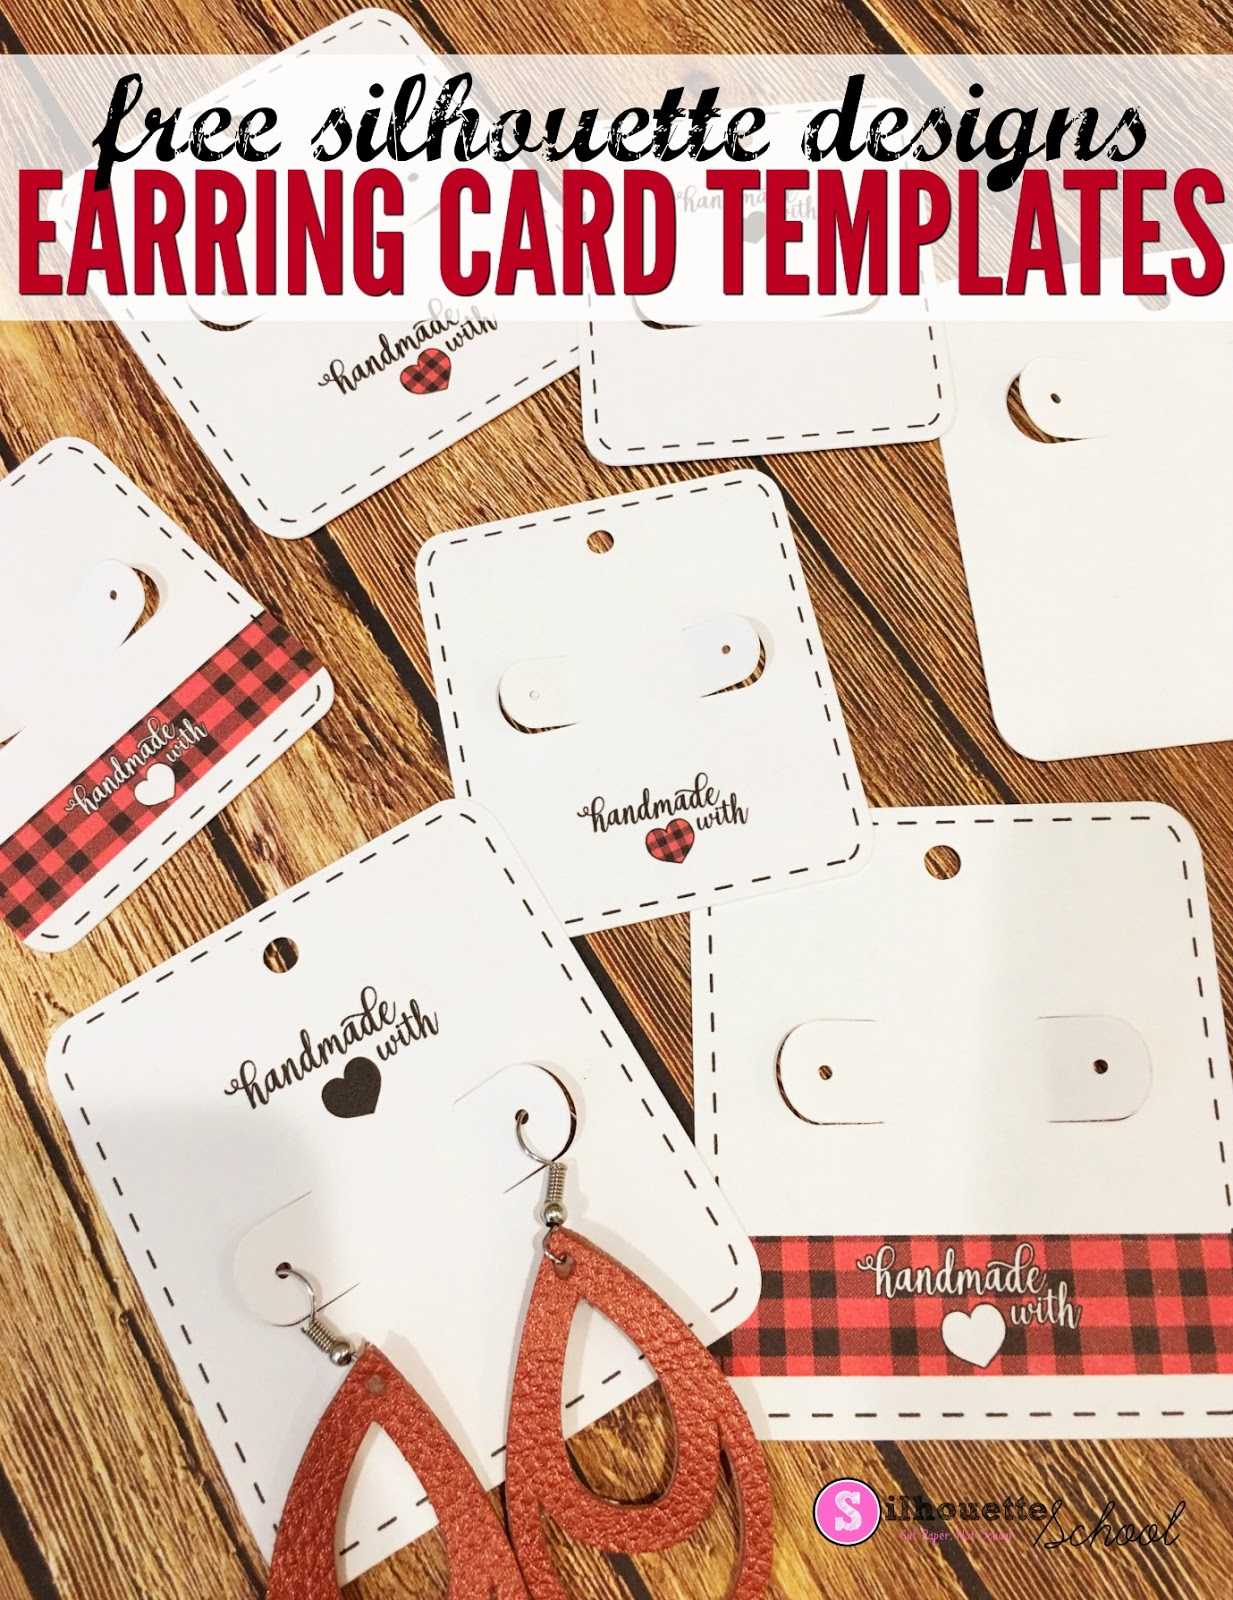 Free Silhouette Earring Card Templates (Set Of 8 Within Silhouette Cameo Card Templates